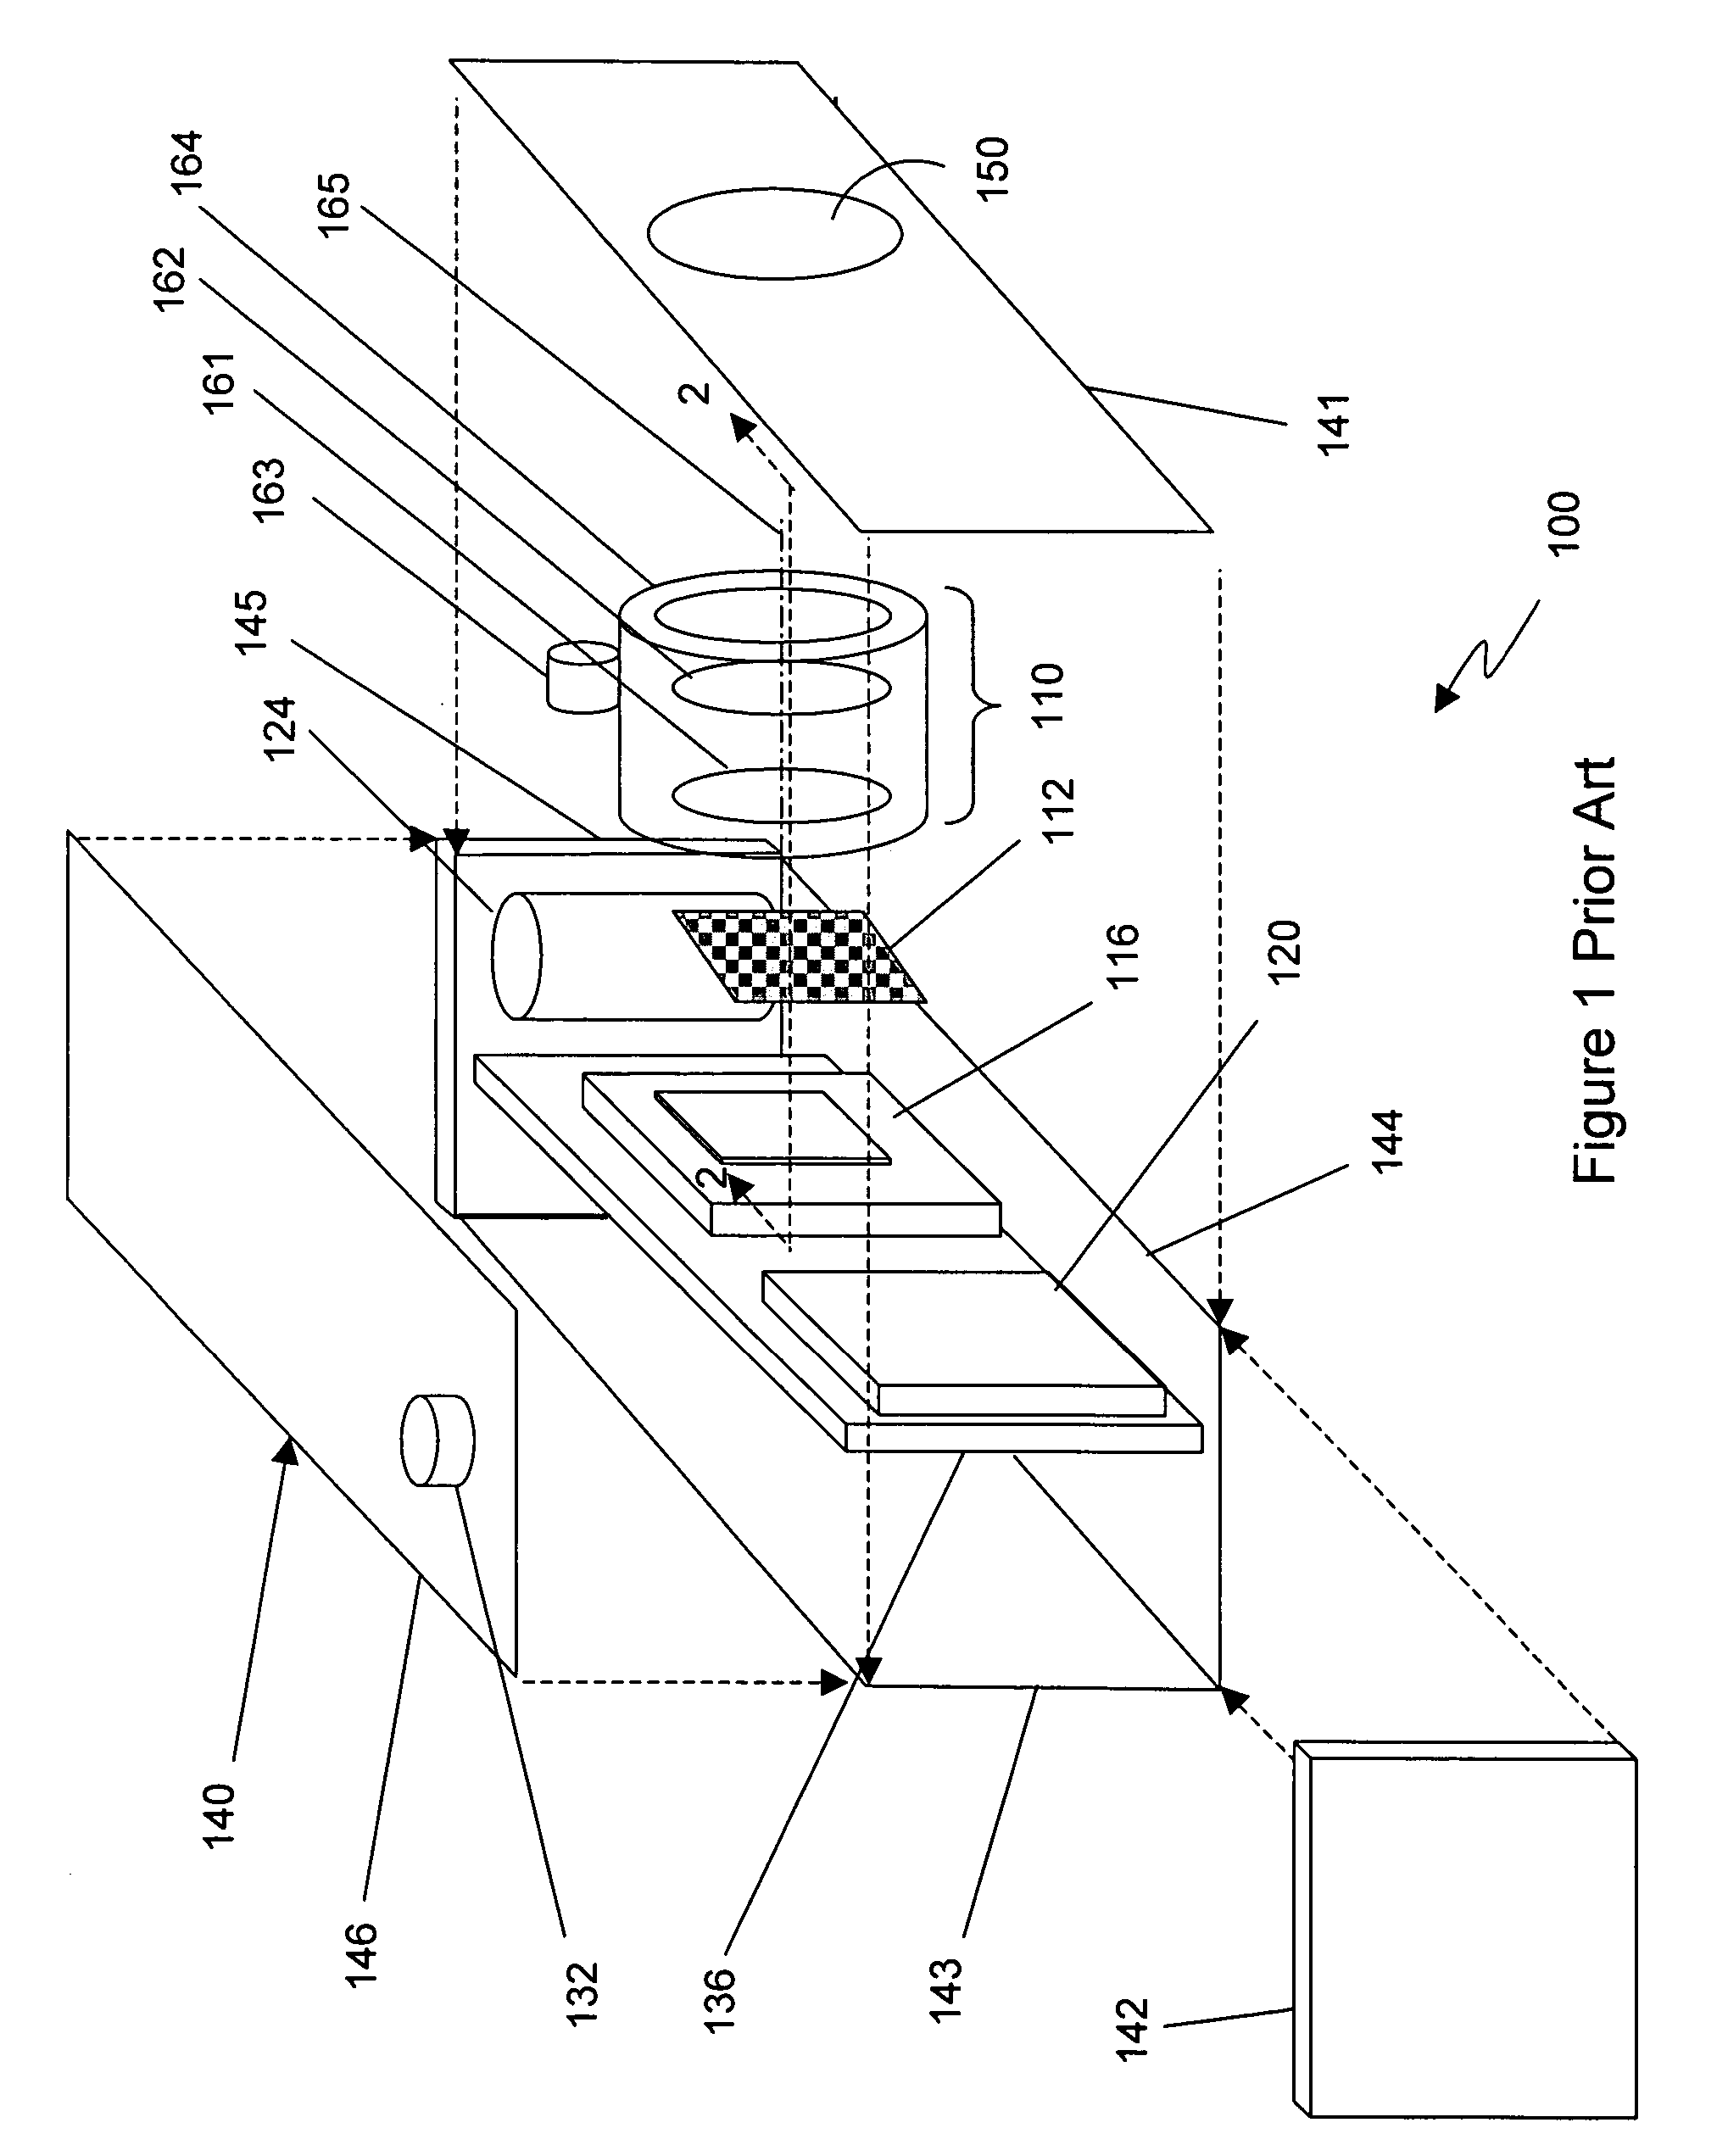 Method and apparatus for use in camera and systems employing same